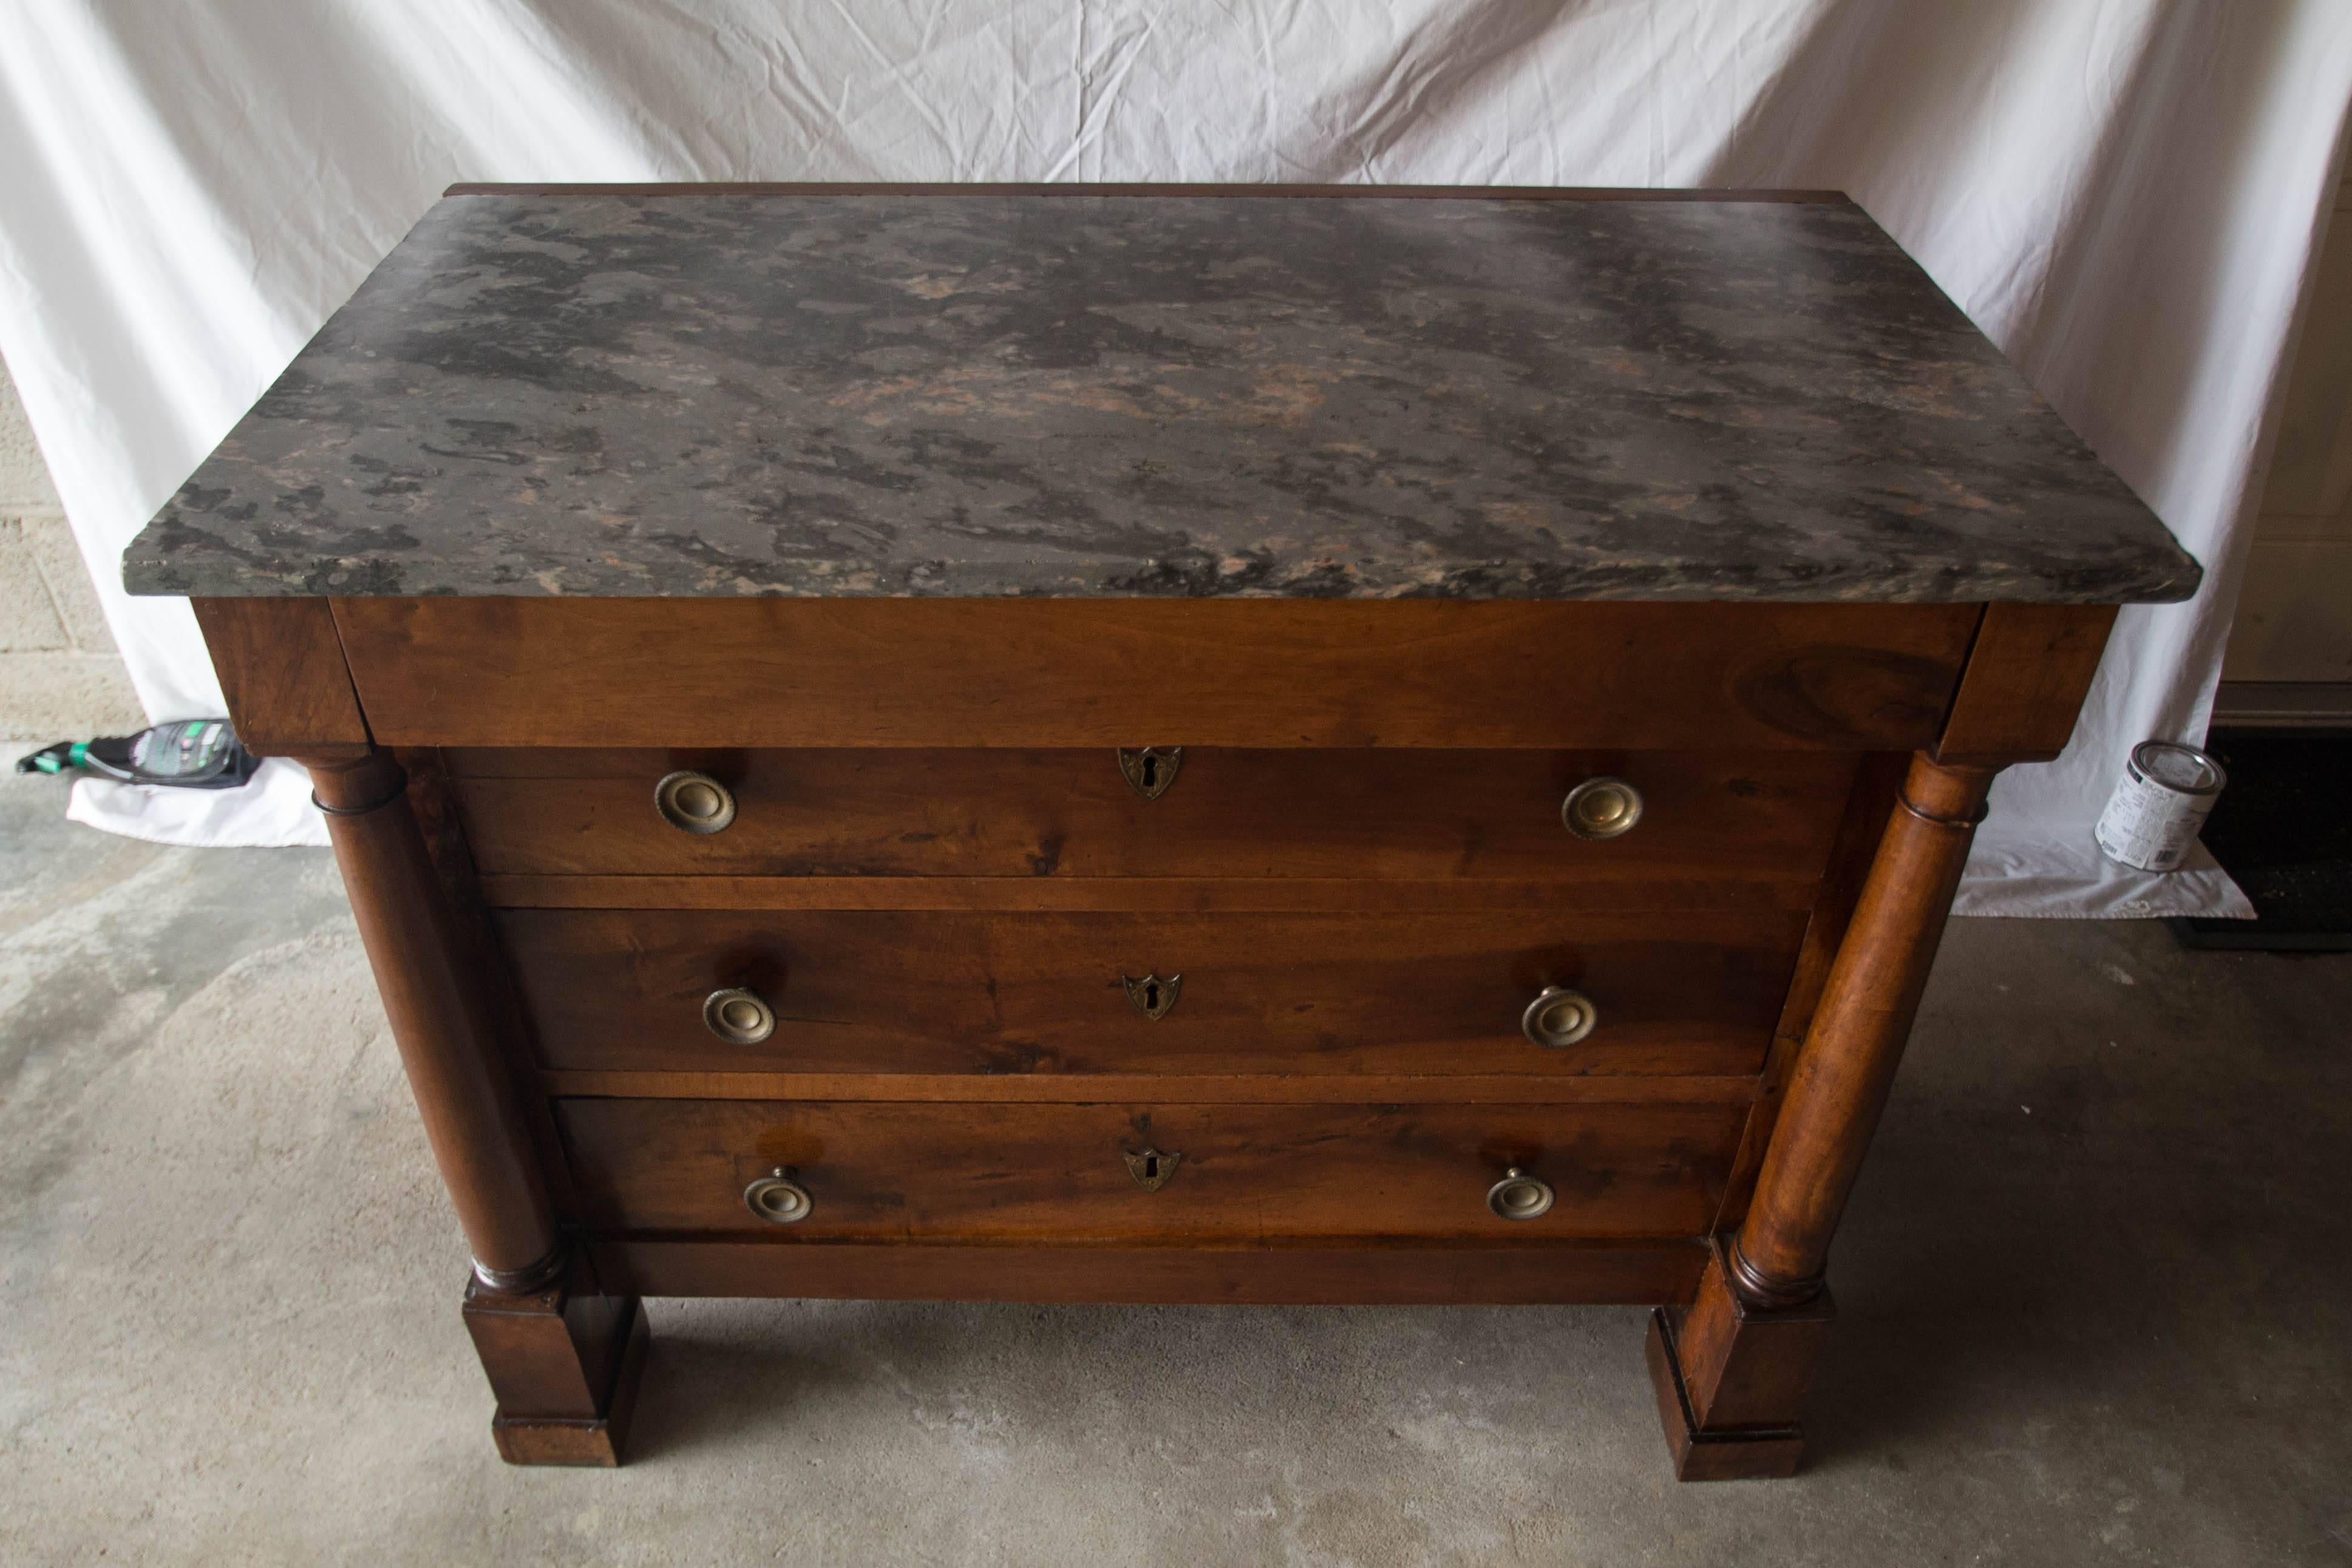 This lovely walnut commode in the Empire style features column pilasters with squared legs. The patina is rich and showcases the original brass hardware and key escutcheons. The marble top is different shades of gray with hints of terracotta.